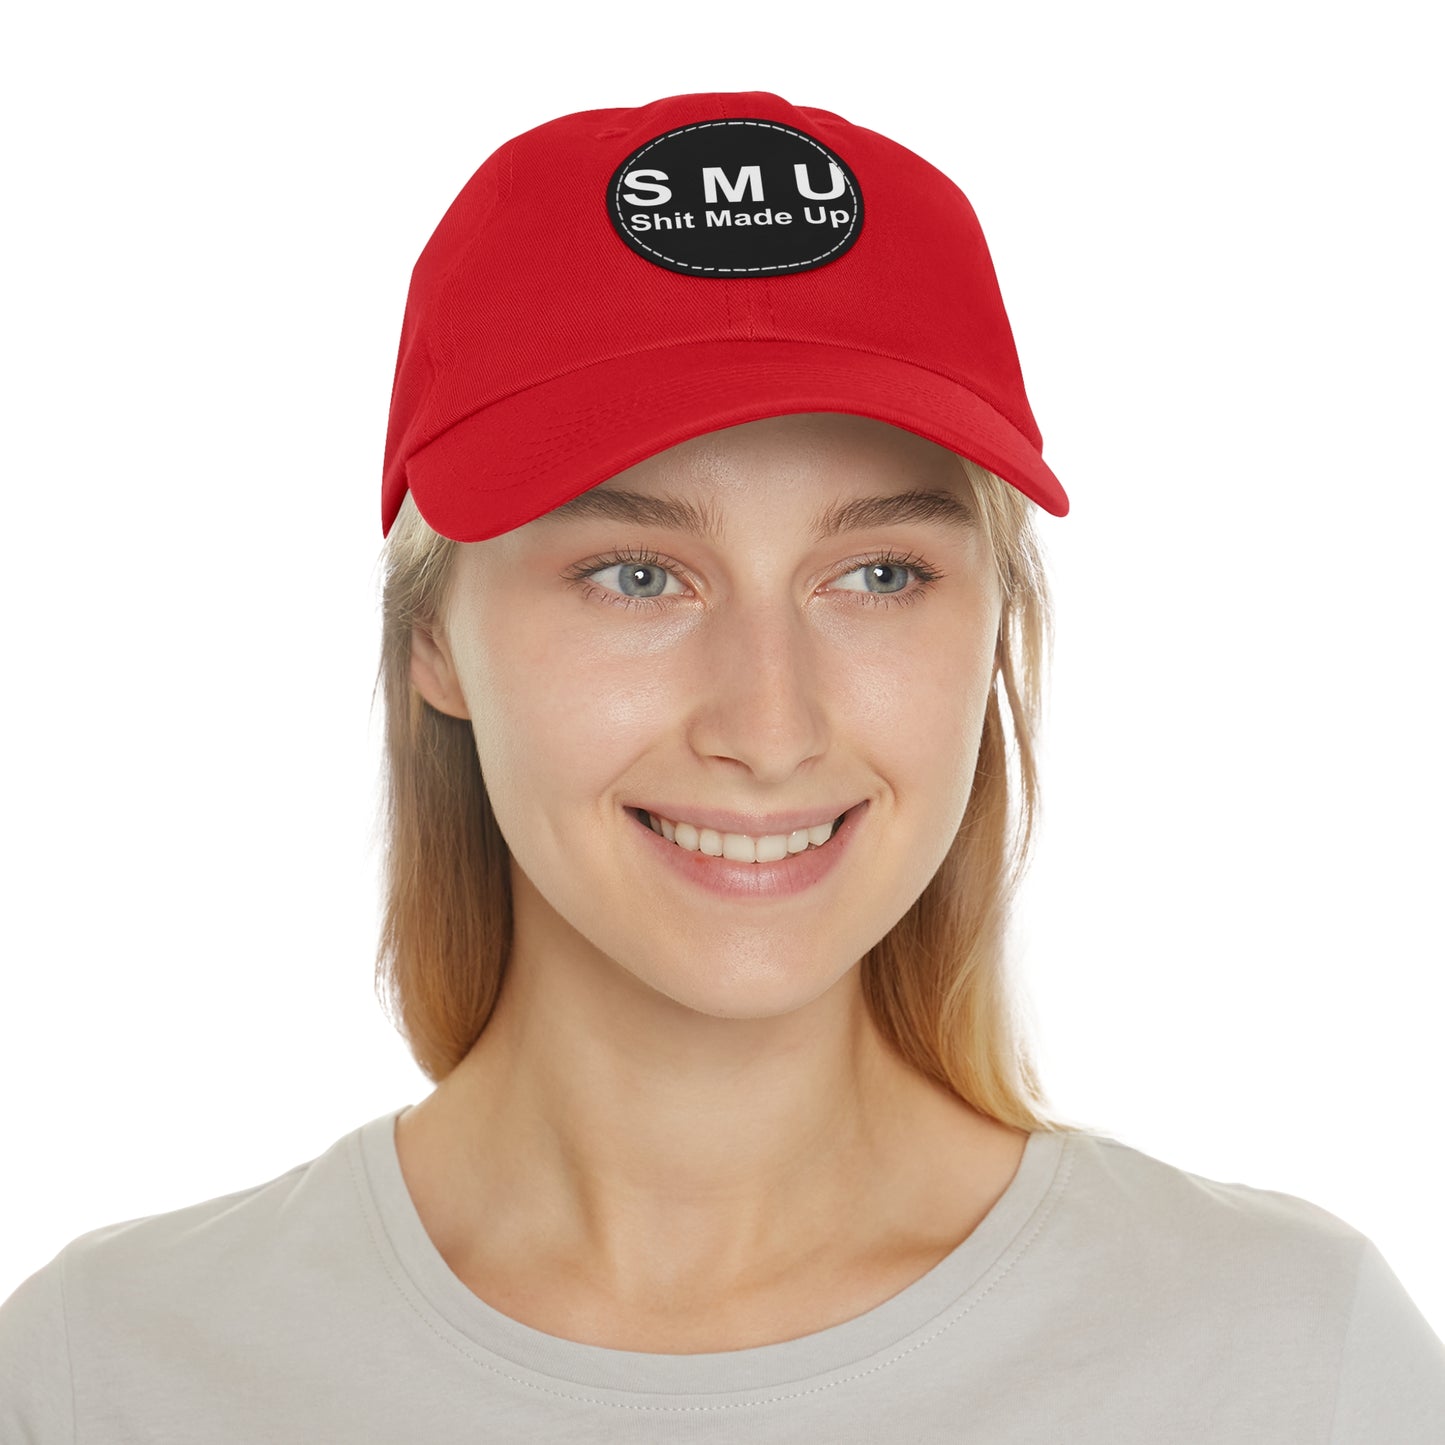 SMU Dad Hat with Leather Patch (Round)